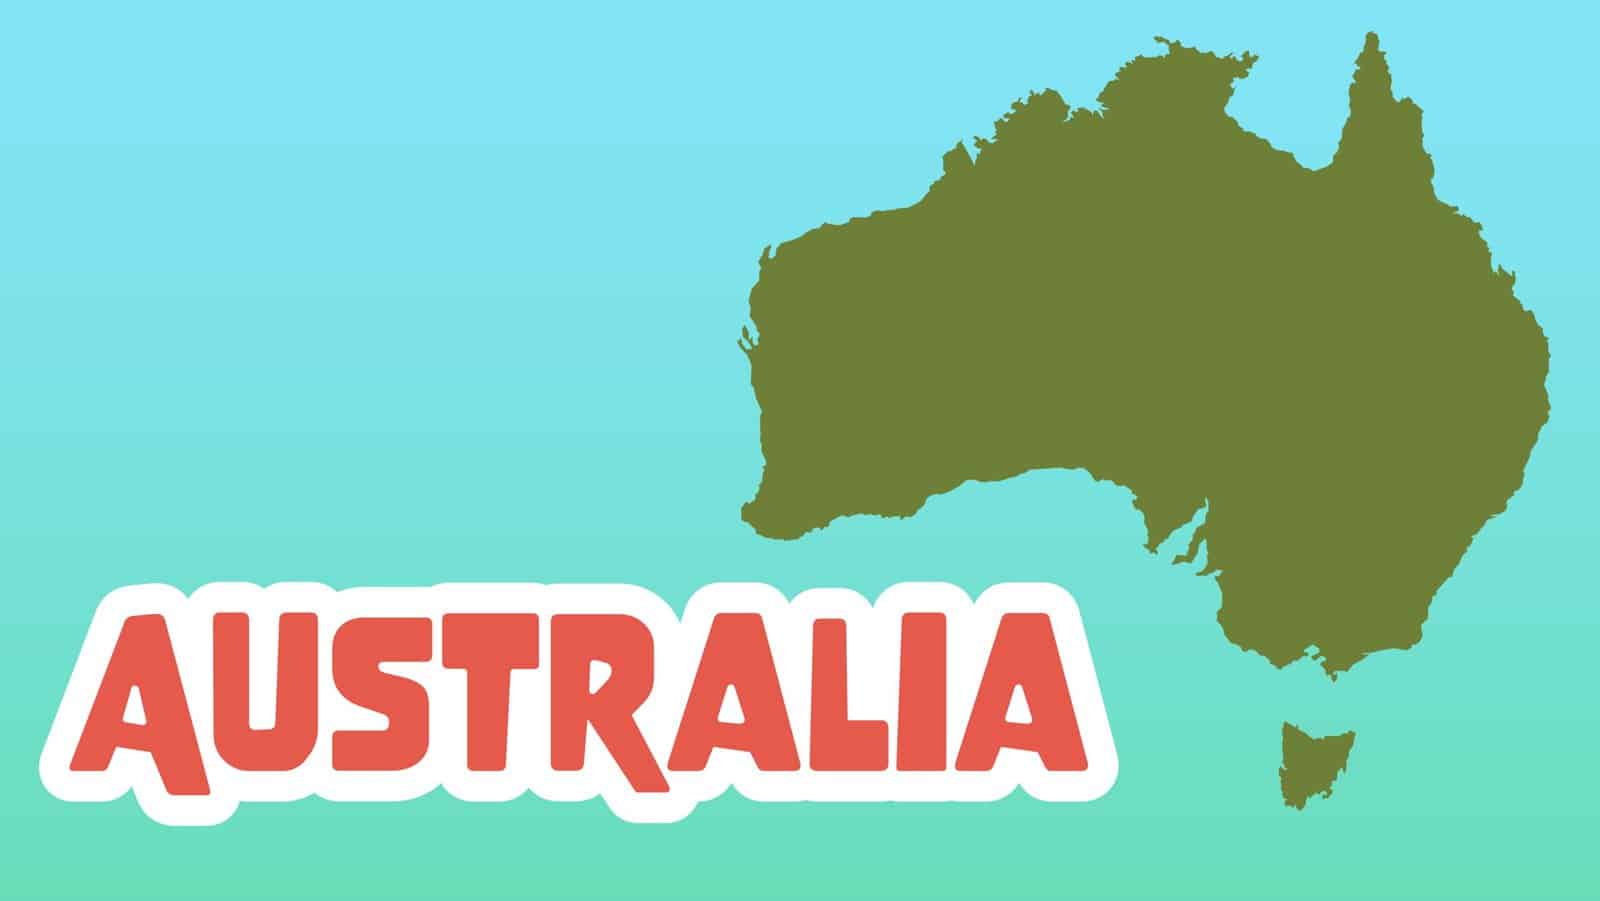 Australia Facts for Kids – 5 Awesome Facts about Australia